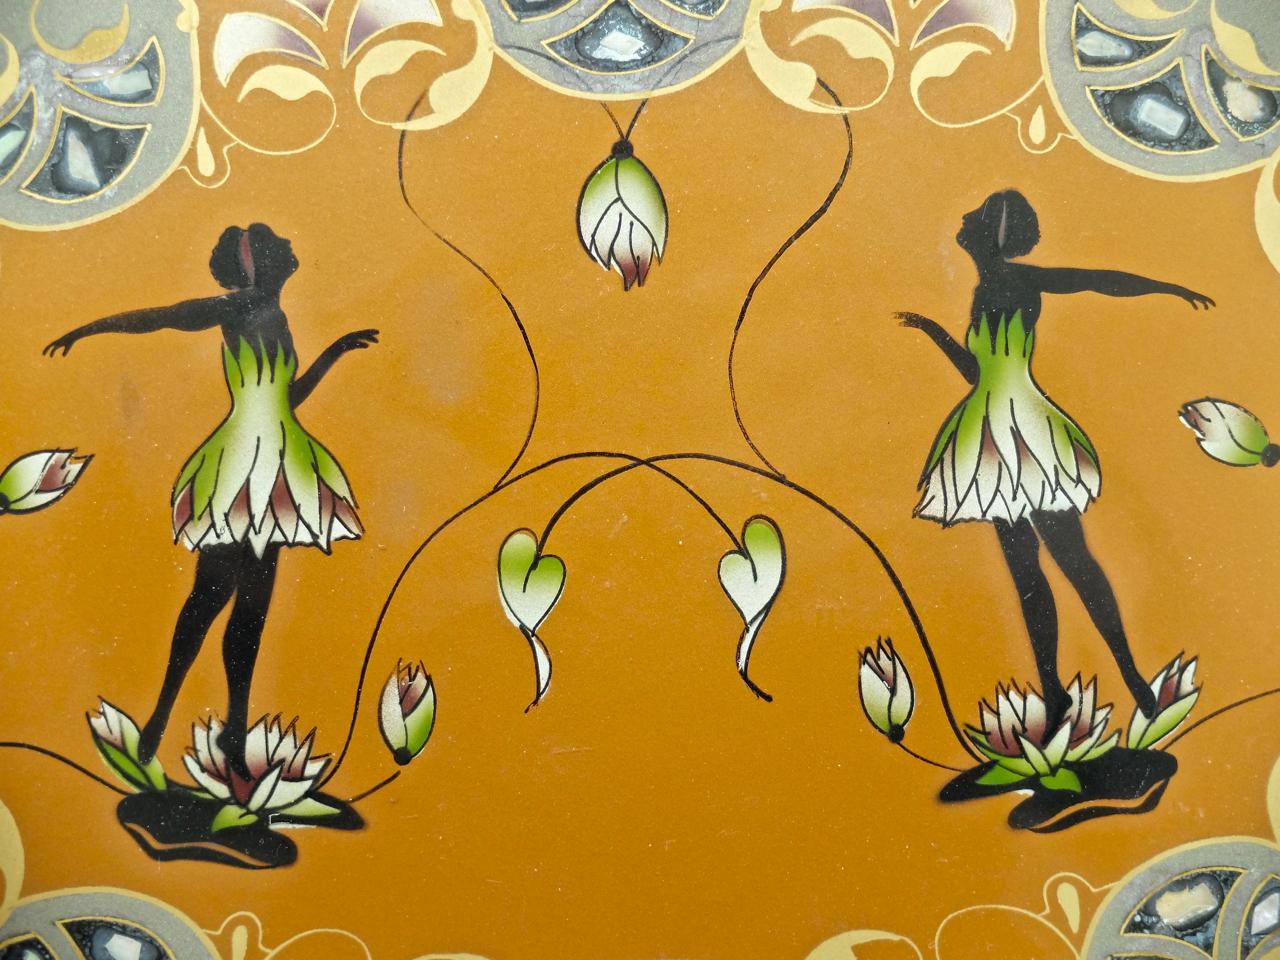 Very nice tray with reverse glass painting and mother of pearl inlays.
2 Graceful dancers on water lilies framed with floral motifs. Edging with wickerwork and 2 handles.